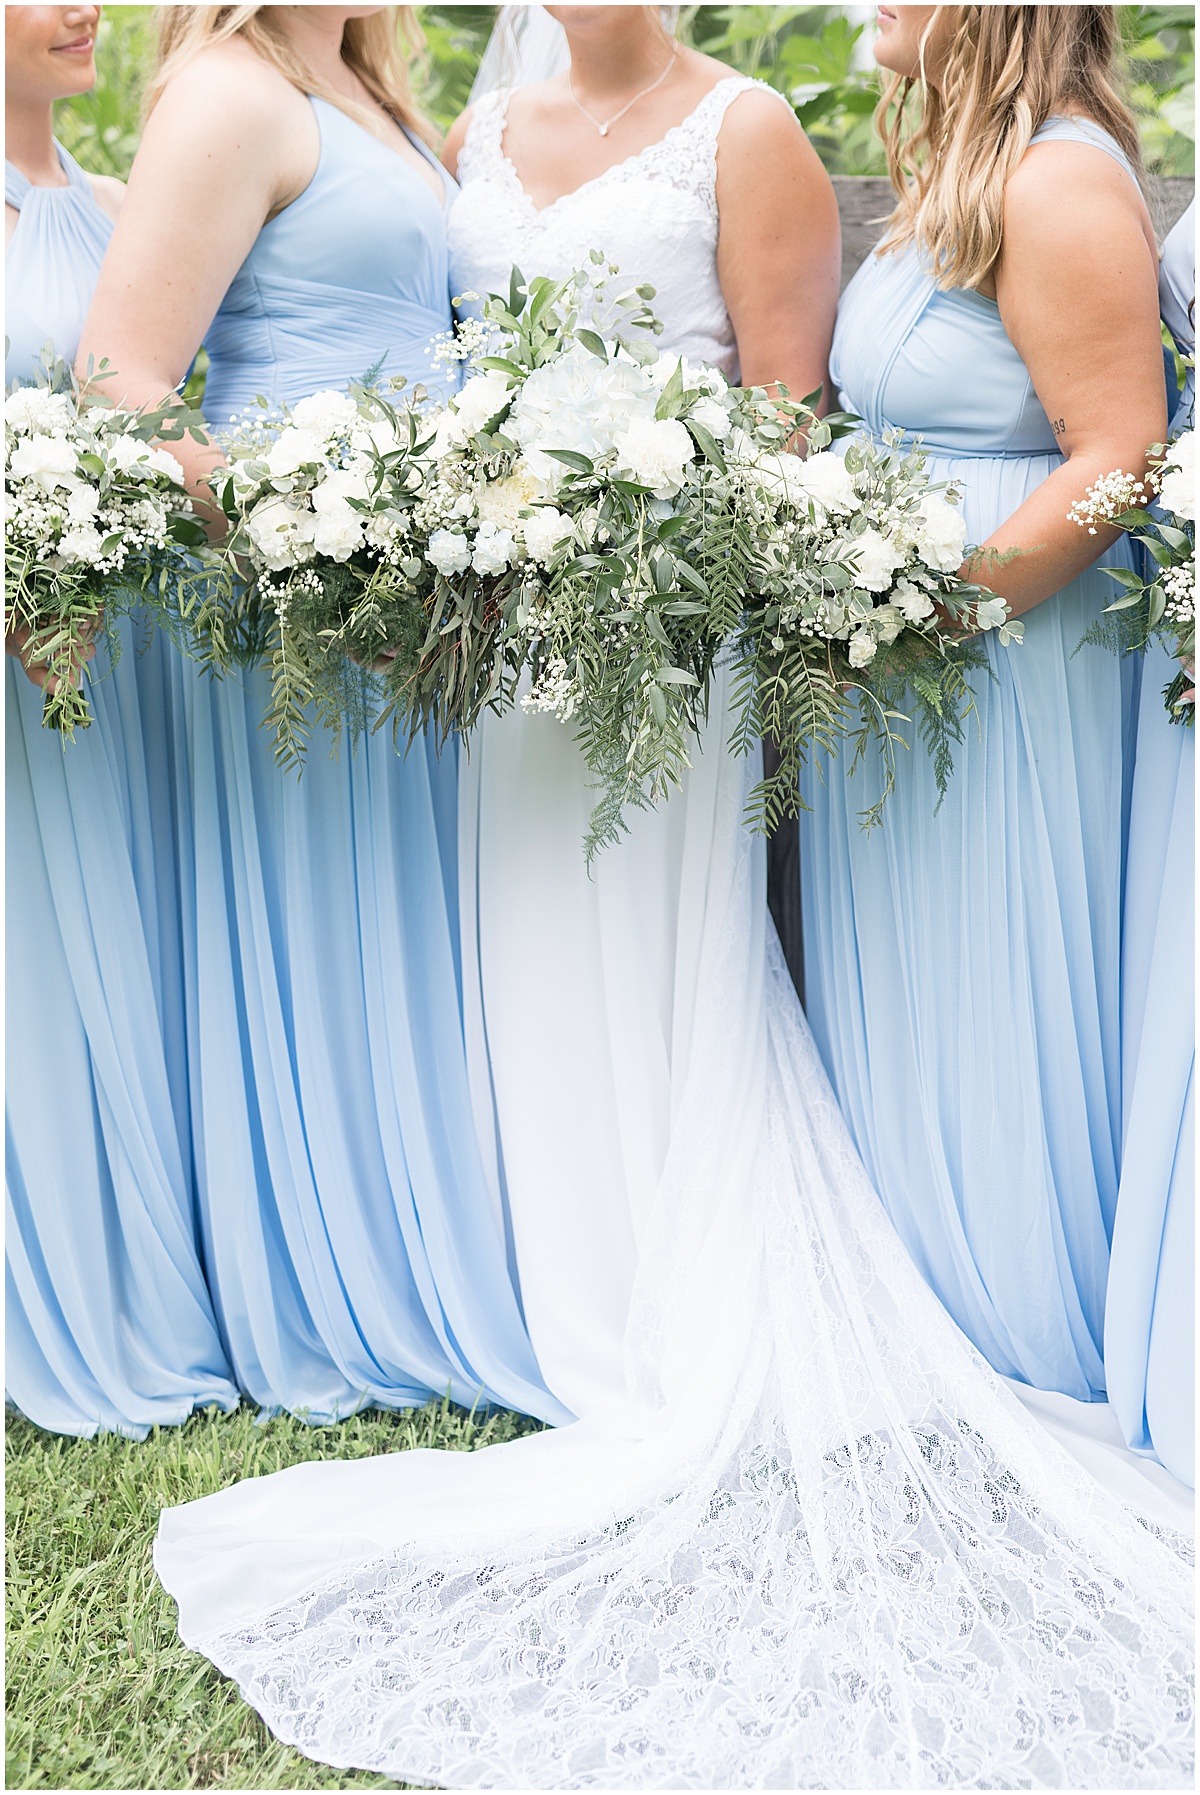 Bridesmaids photo at Hawk Point Acres Wedding in Anderson, Indiana